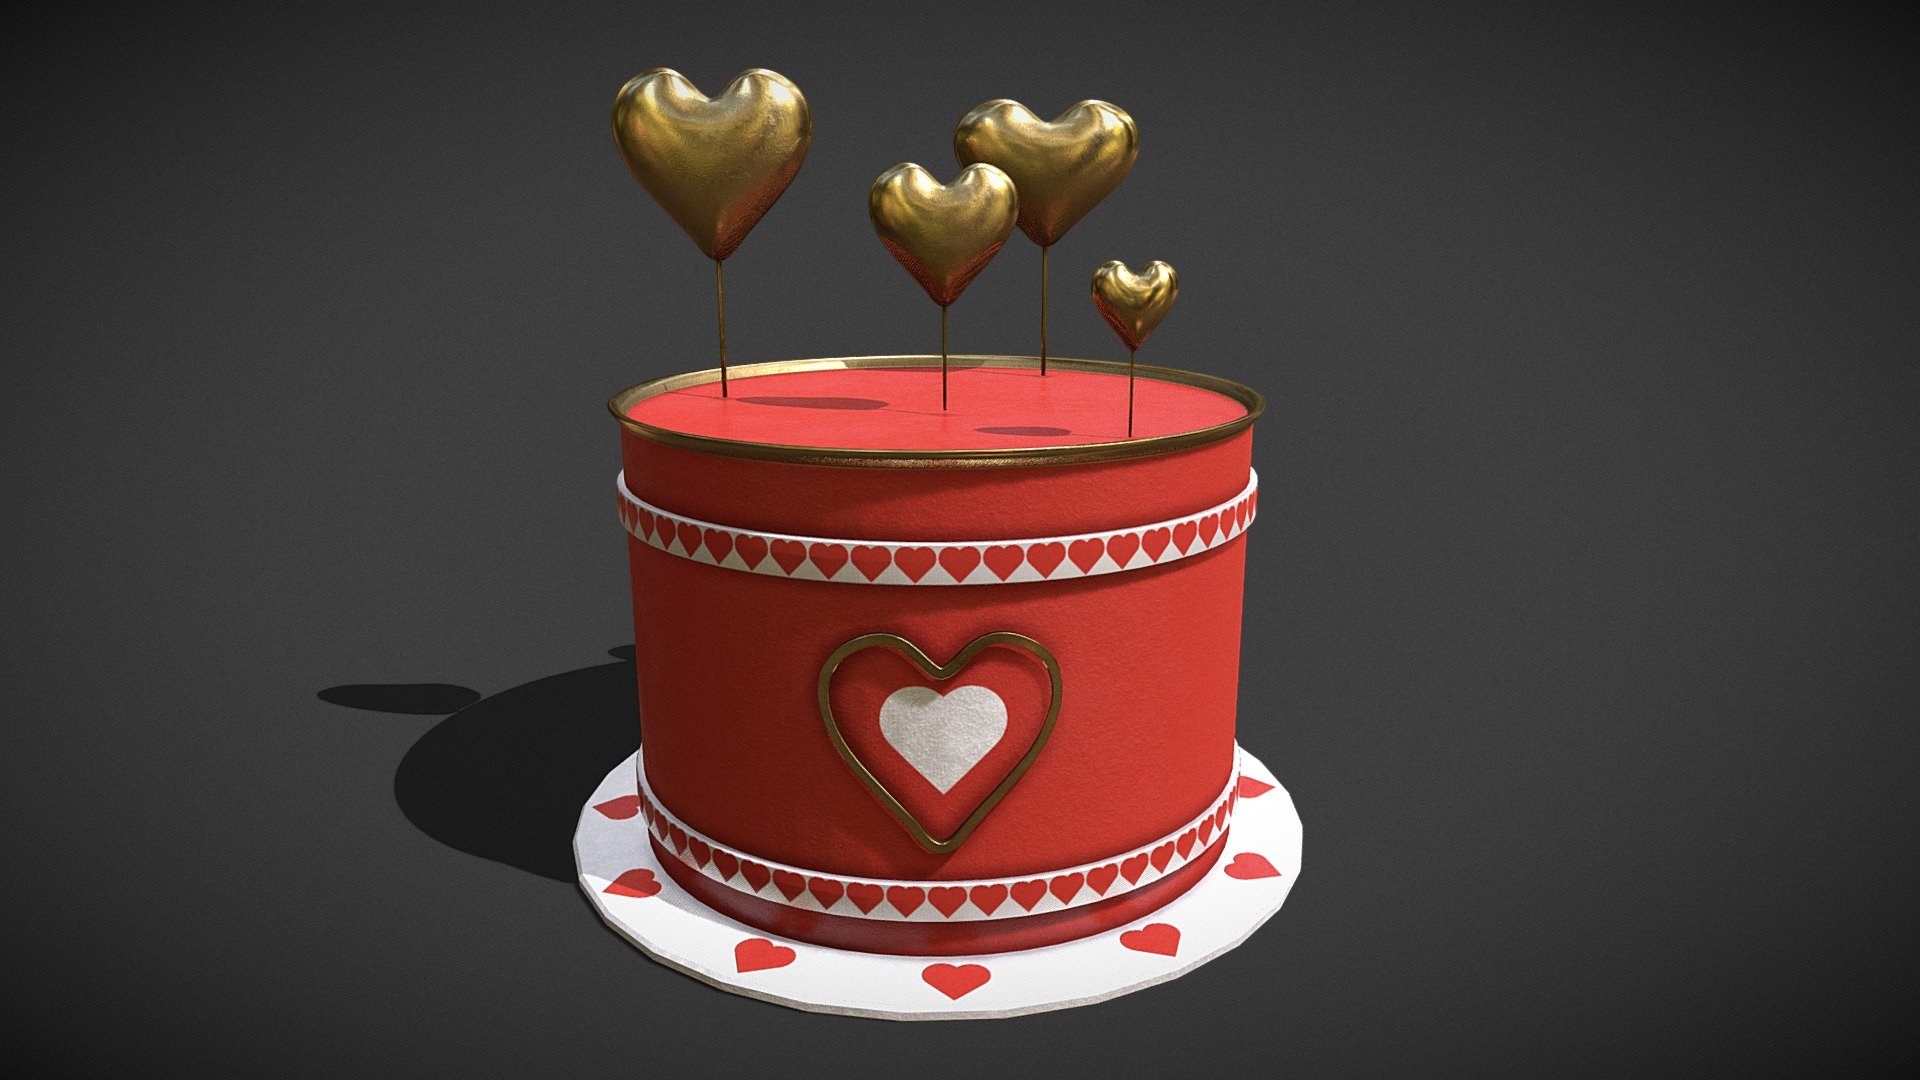 Red And White Heart Balloon Cake
VR / AR / Low-poly
PBR approved
Geometry Polygon mesh
Polygons 5,212
Vertices 5,495
Textures 4K - Red And White Heart Balloon Cake - Buy Royalty Free 3D model by GetDeadEntertainment 3d model